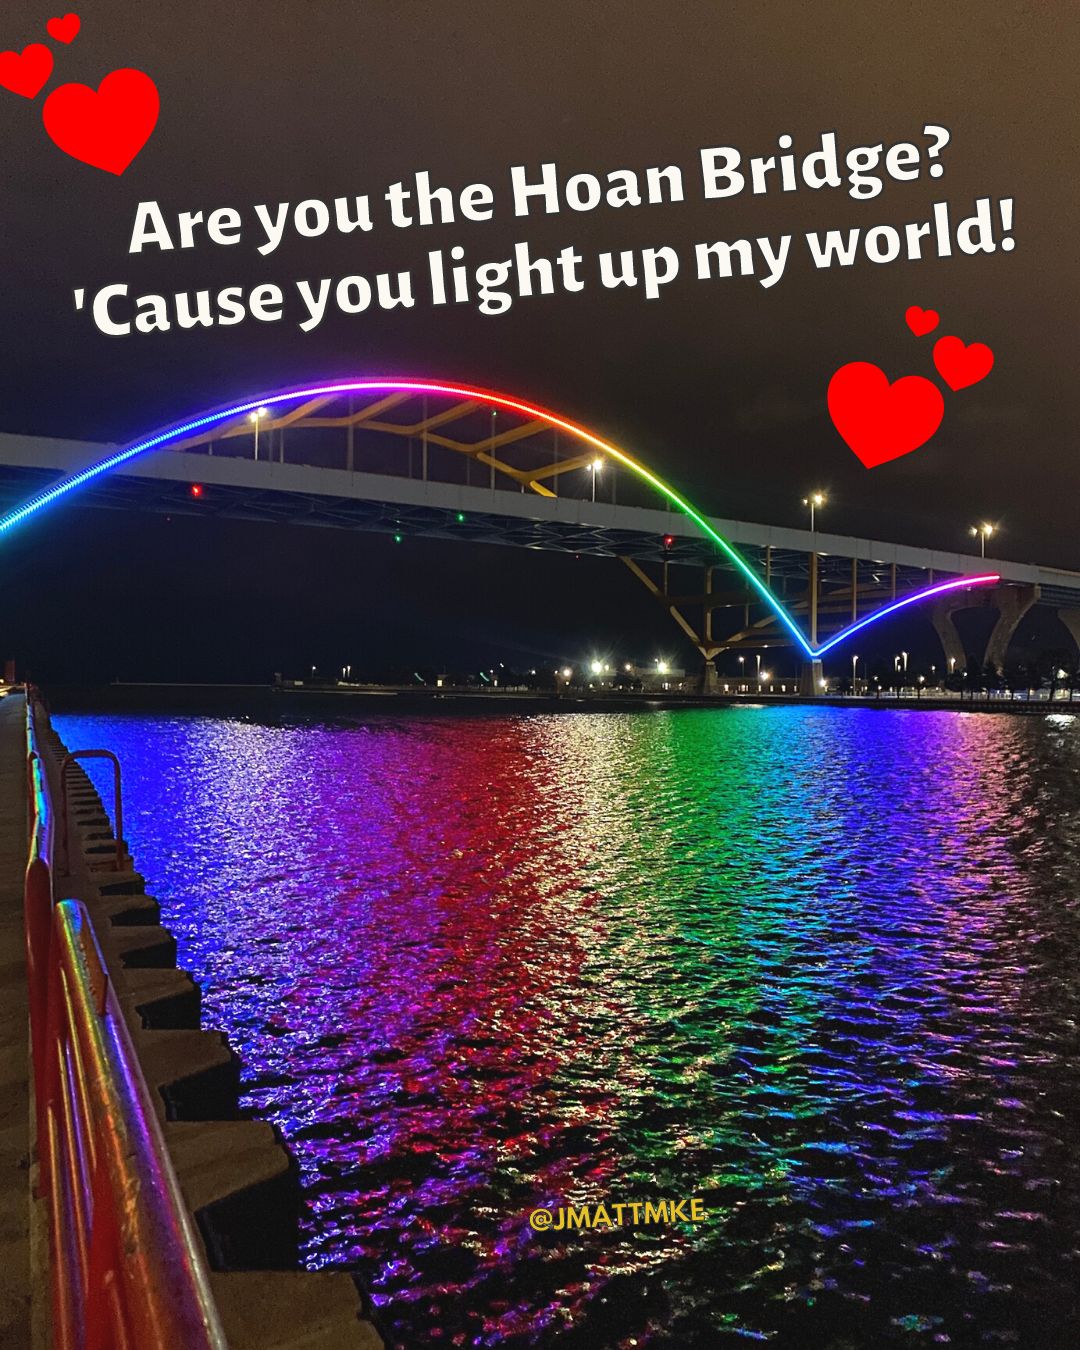 “Are you the Hoan Bridge? ‘Cause you light up my world!”